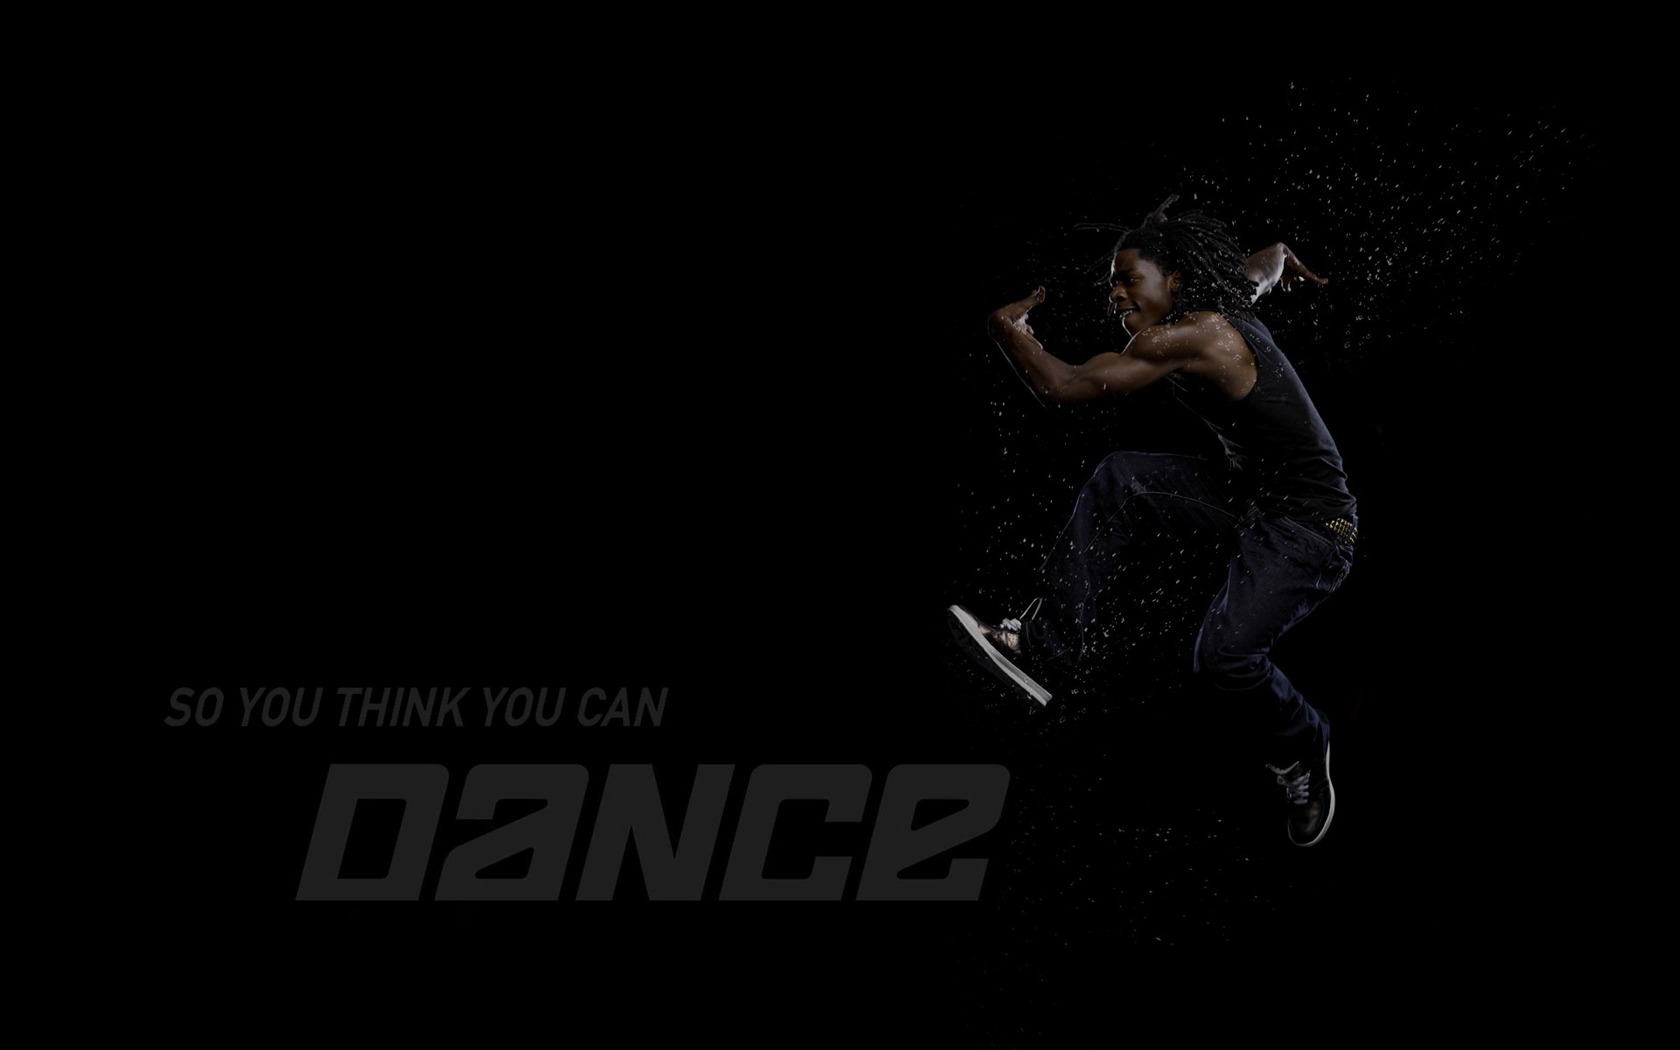 So You Think You Can Dance 舞林争霸 壁纸(二)16 - 1680x1050